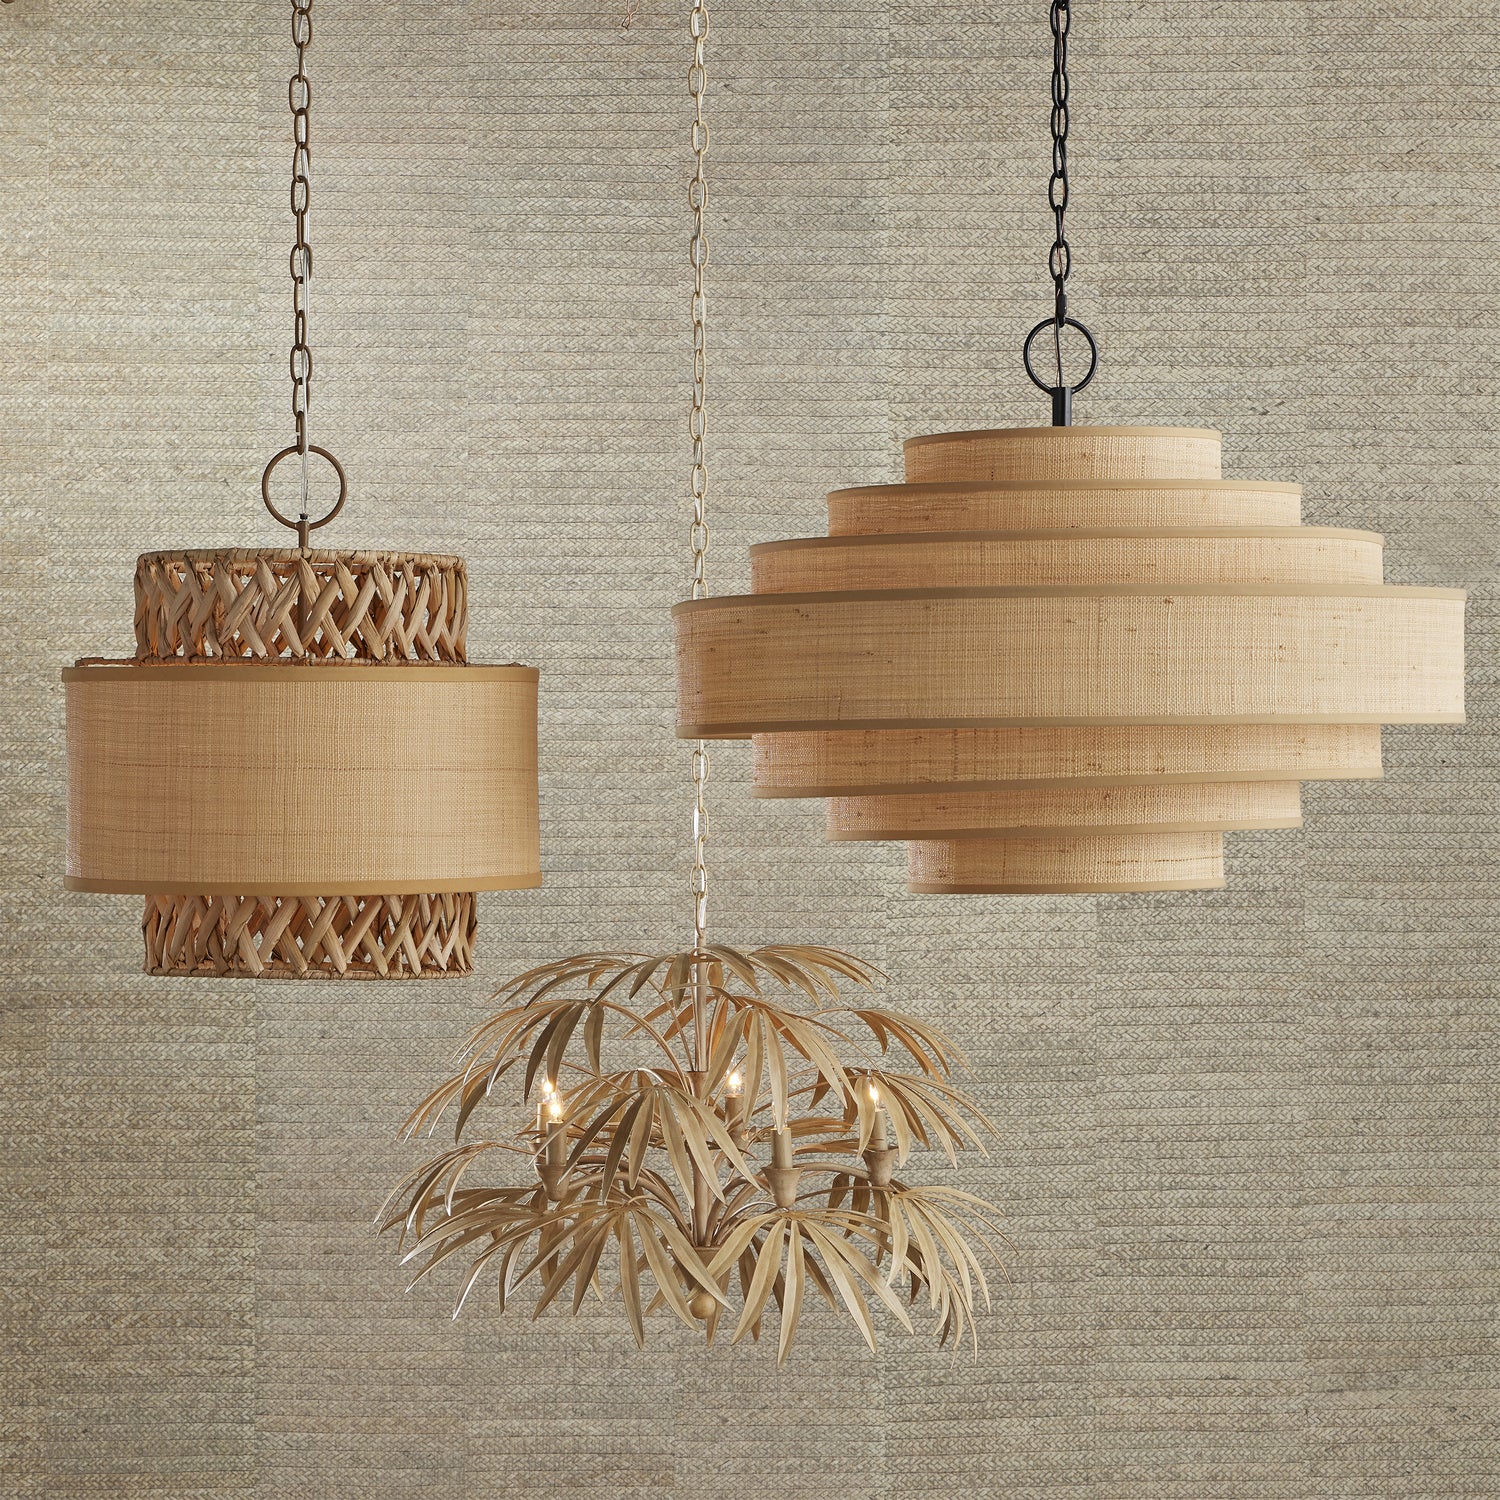 Four Light Pendant from the Isola collection in Khaki/Natural finish